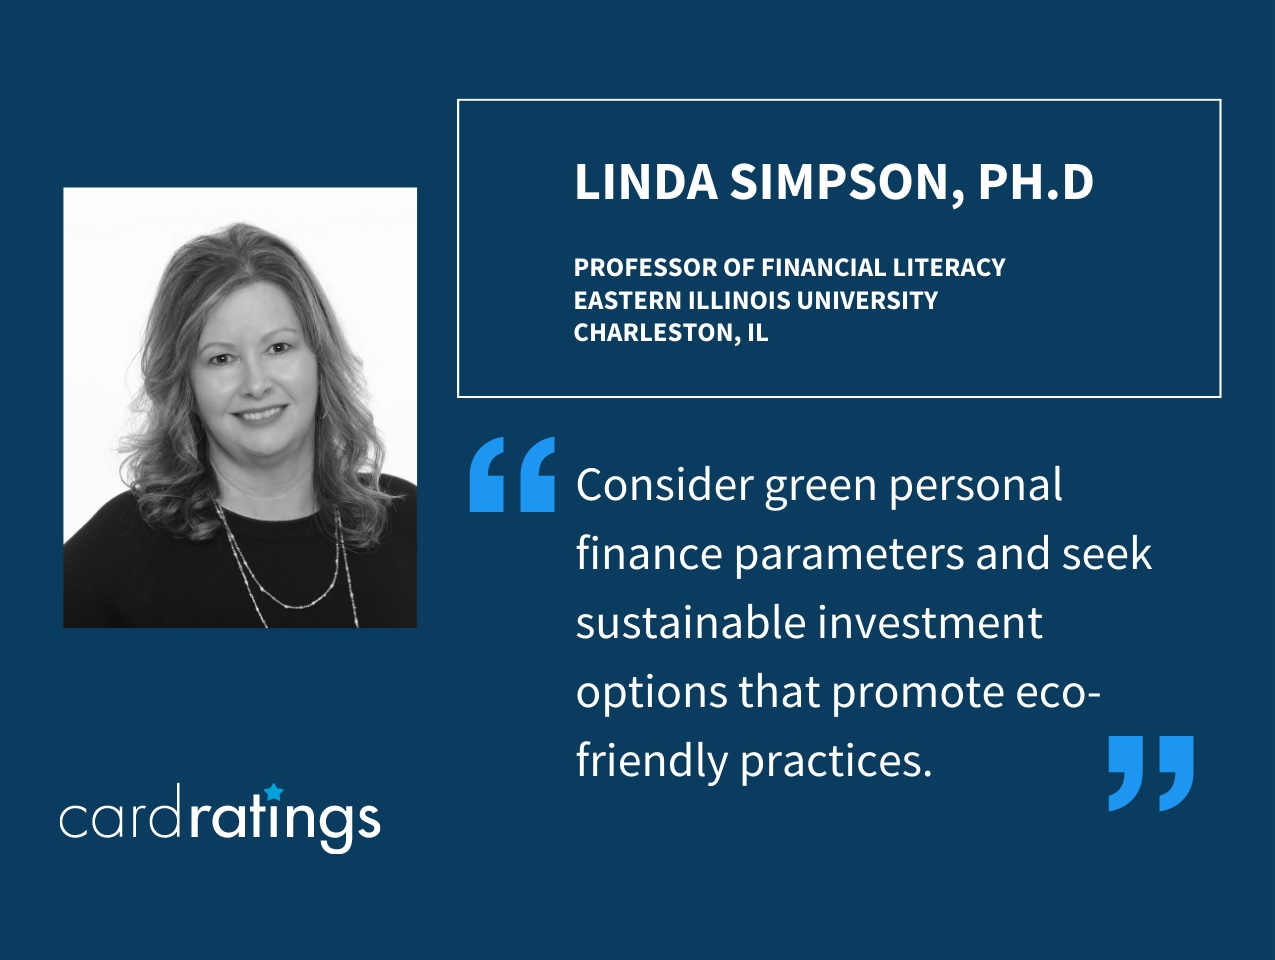 Linda Simpson, professor at Eastern Illinois University, discusses environmentally friendly personal finance choices